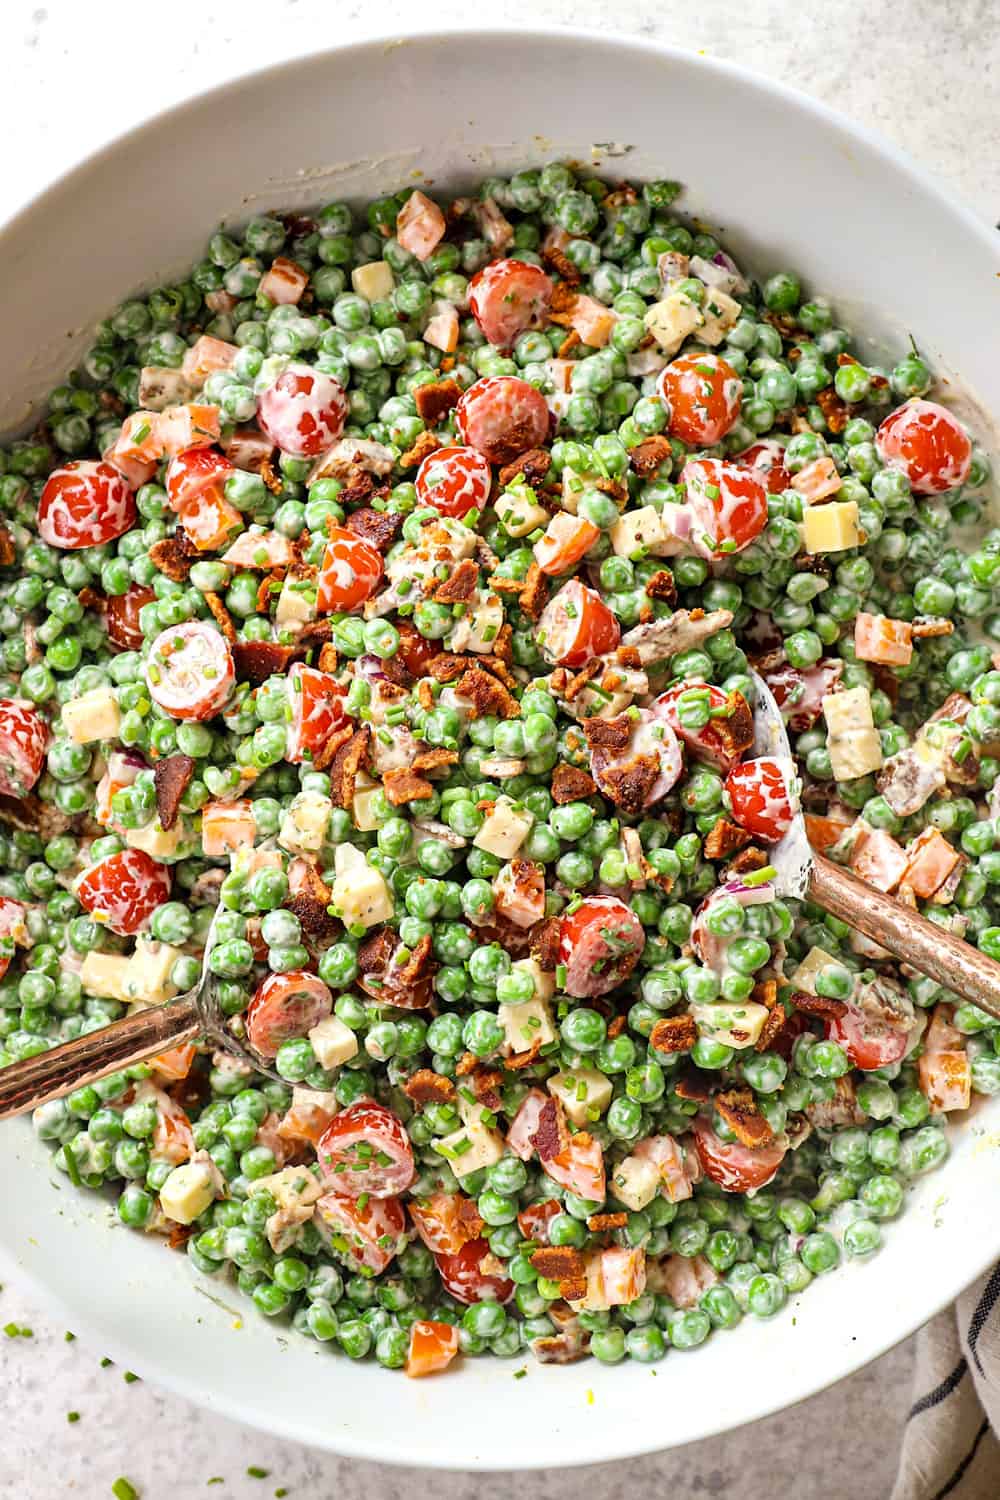 showing how to make pea salad recipe by tossing peas, bacon, cheese, onions, and creamy dressing together in a bowl